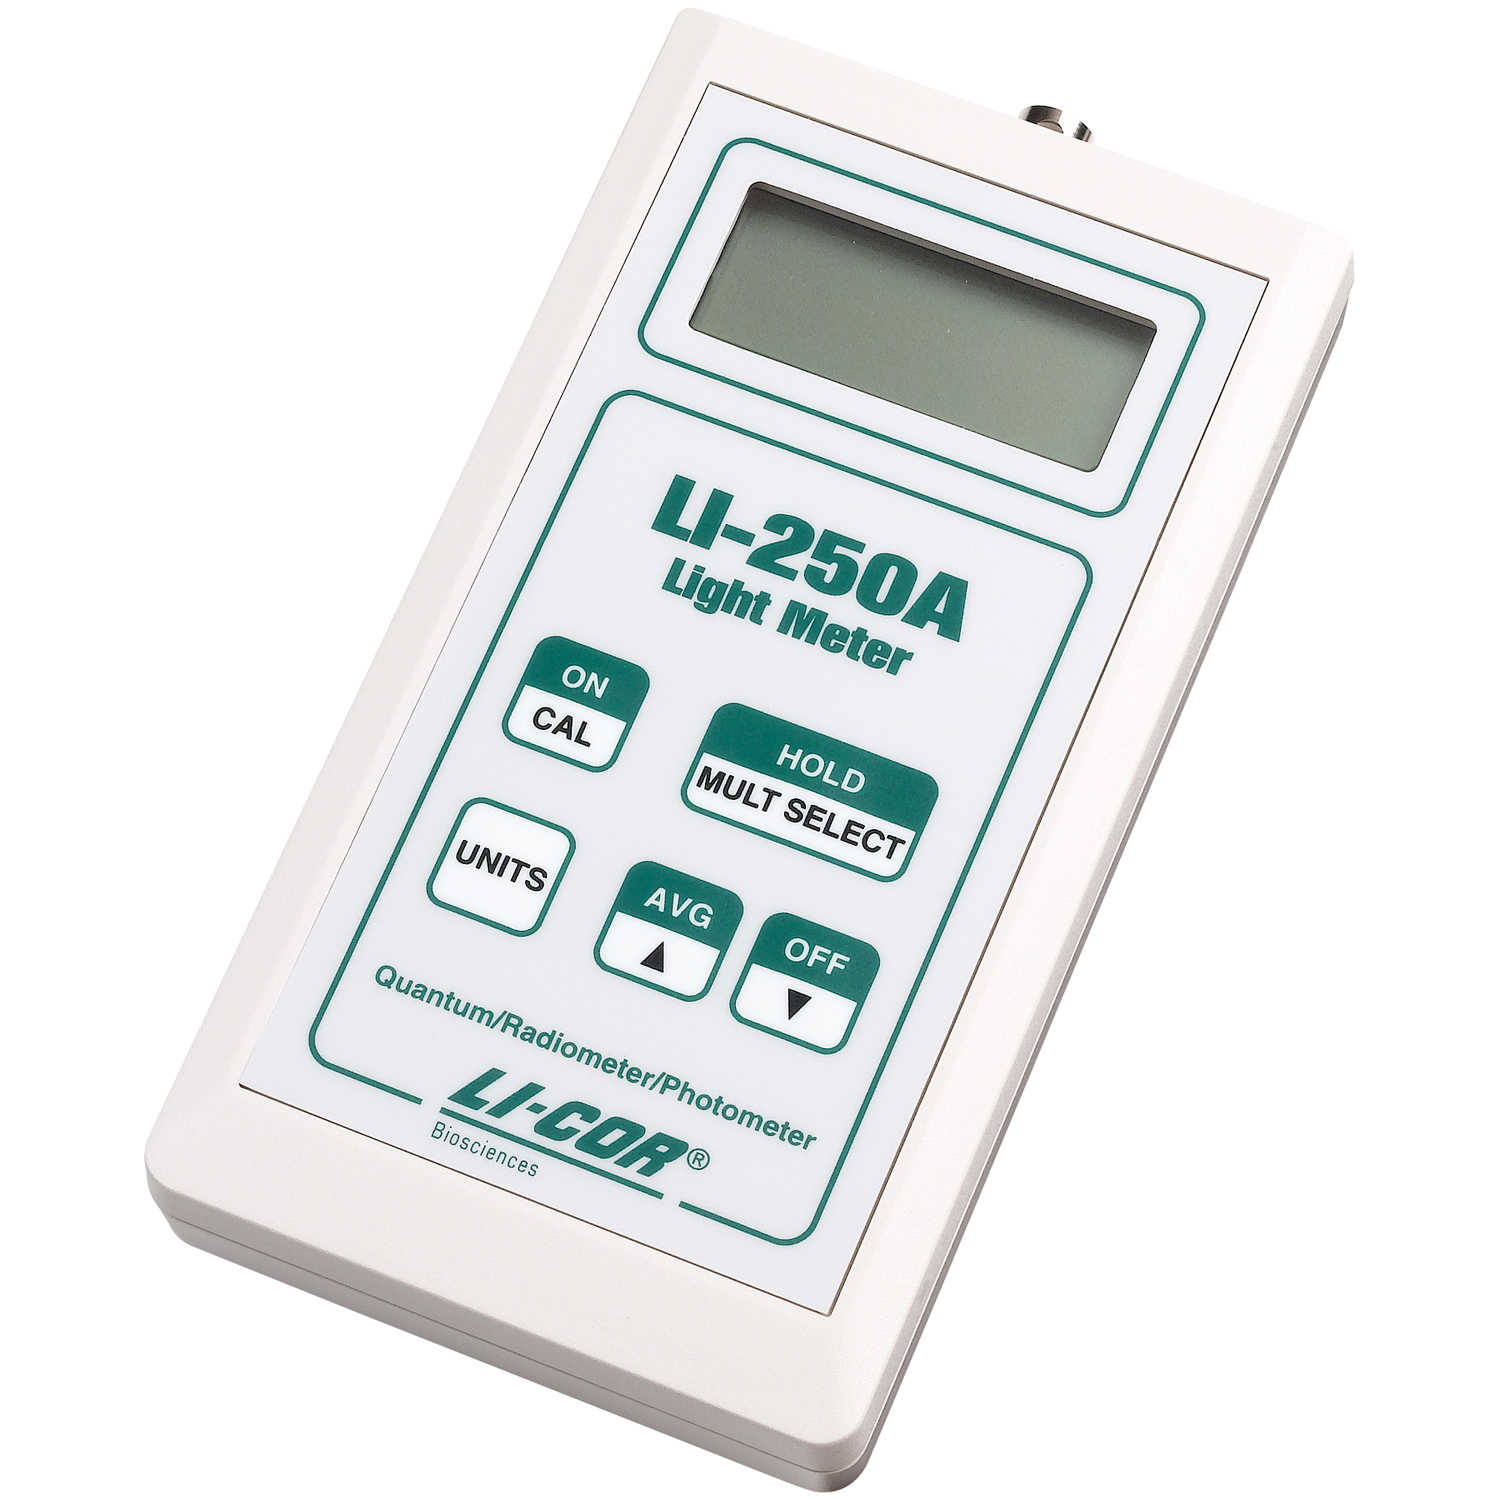 VWR High/Low Memory Alarm Thermometer 4048 High/Low Memory Alarm Thermometer  FREE S&H . VWR Labware & Accessories.